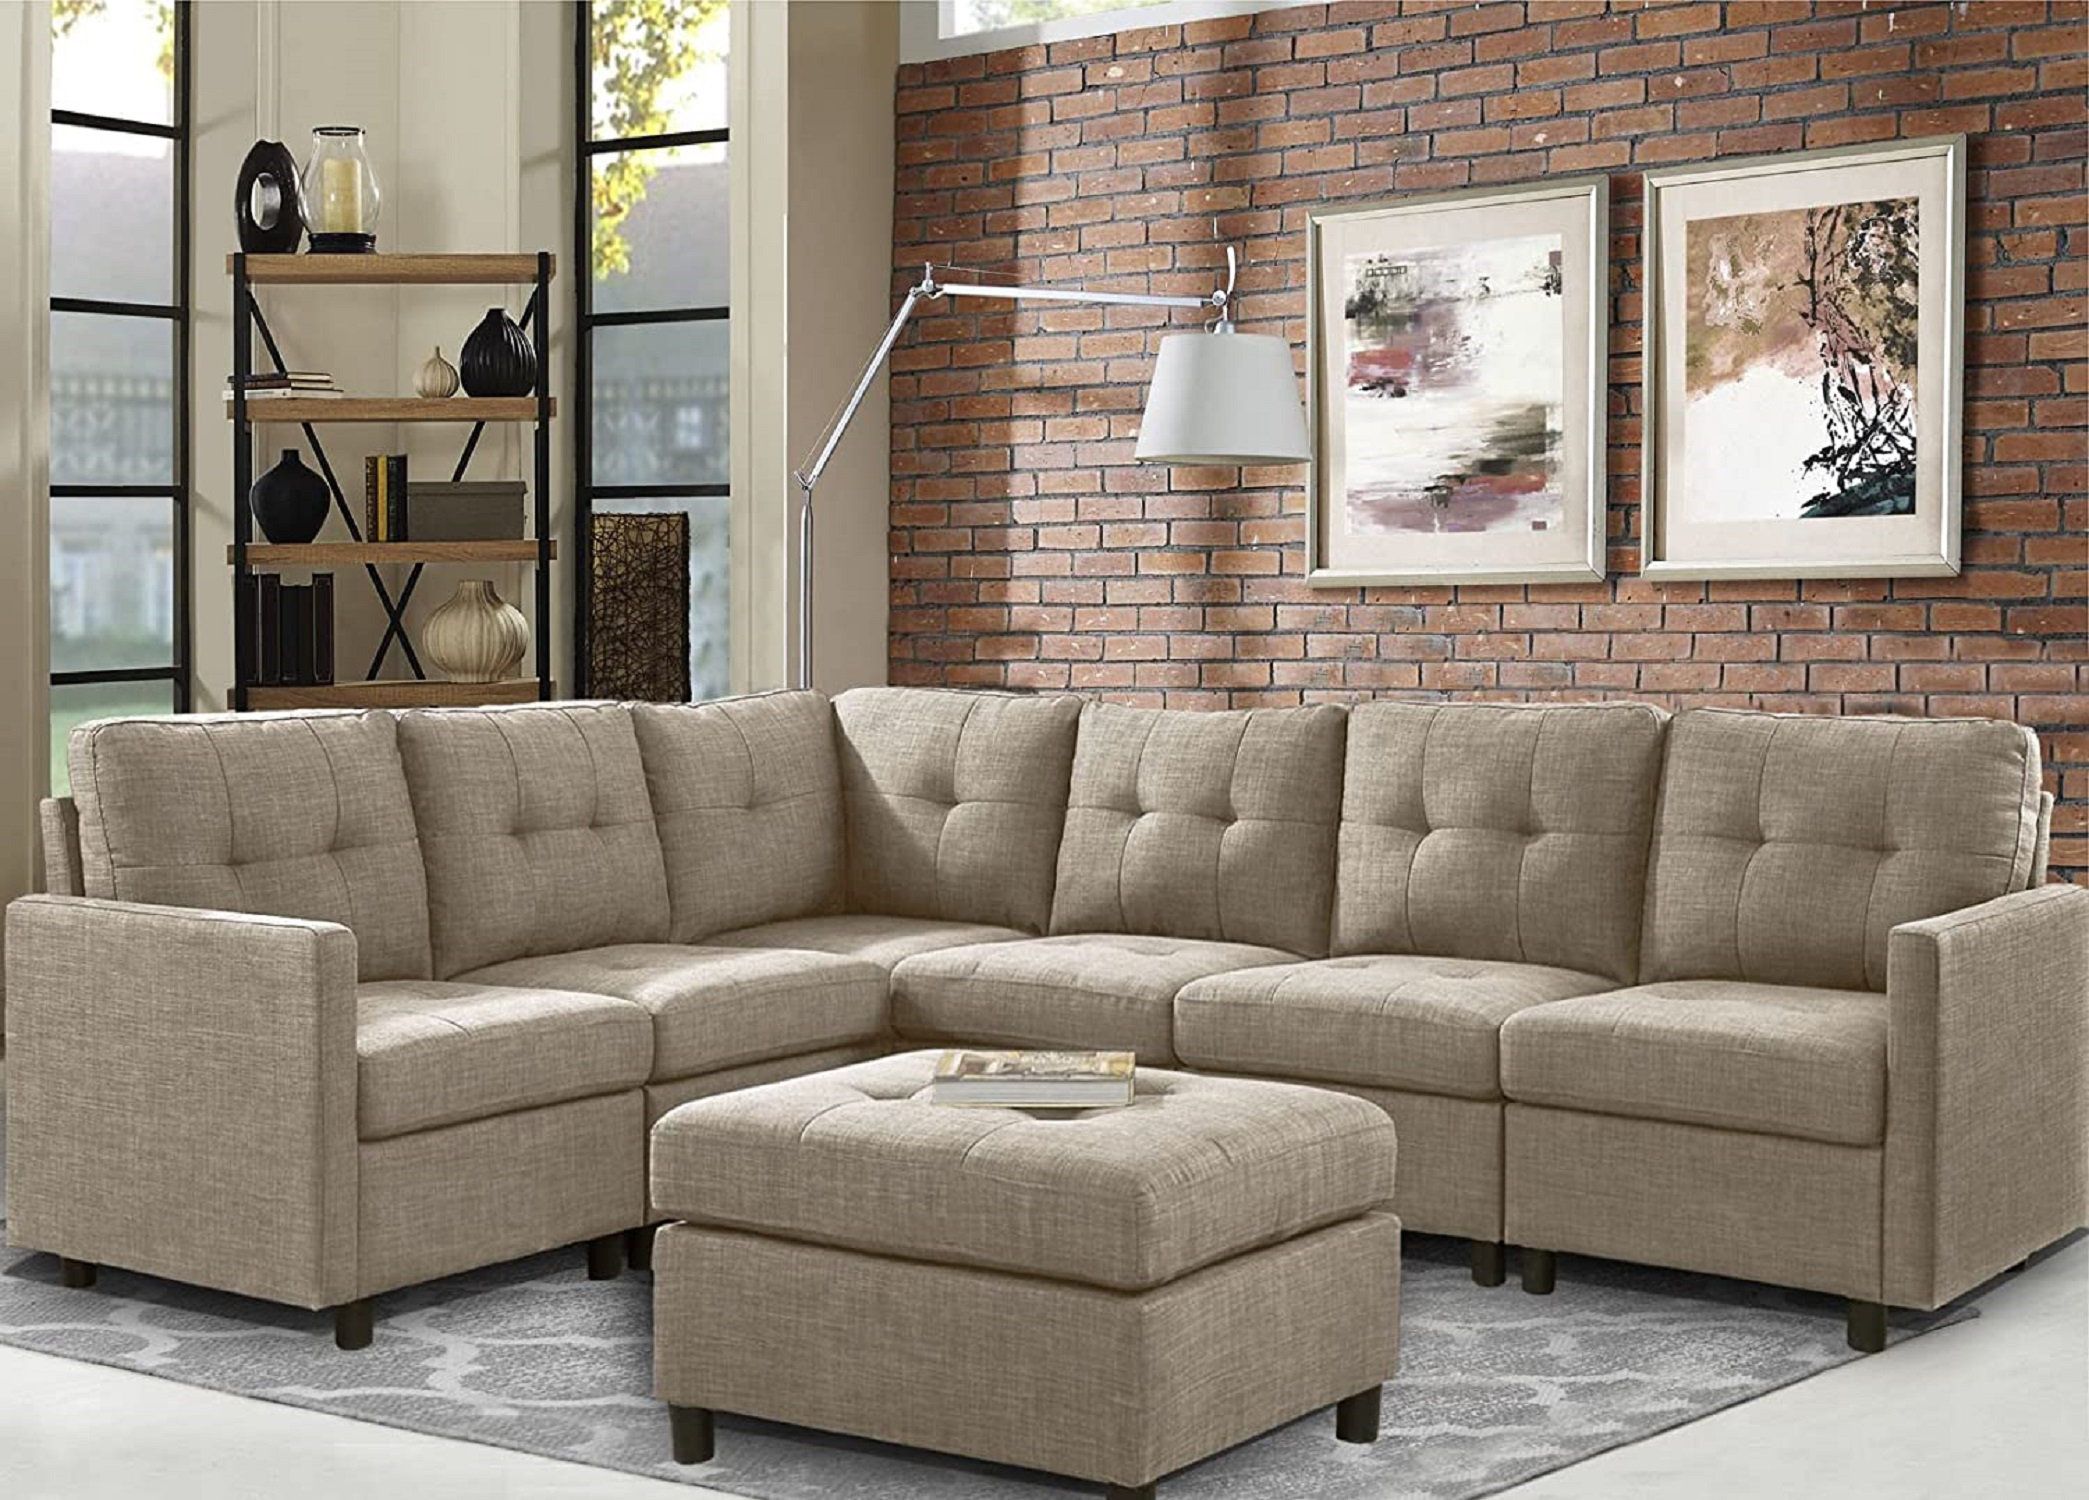 Latitude Run® Modular Sofa & Chaise With Ottoman | Wayfair Intended For Sectional Sofas With Ottomans And Tufted Back Cushion (Gallery 6 of 20)